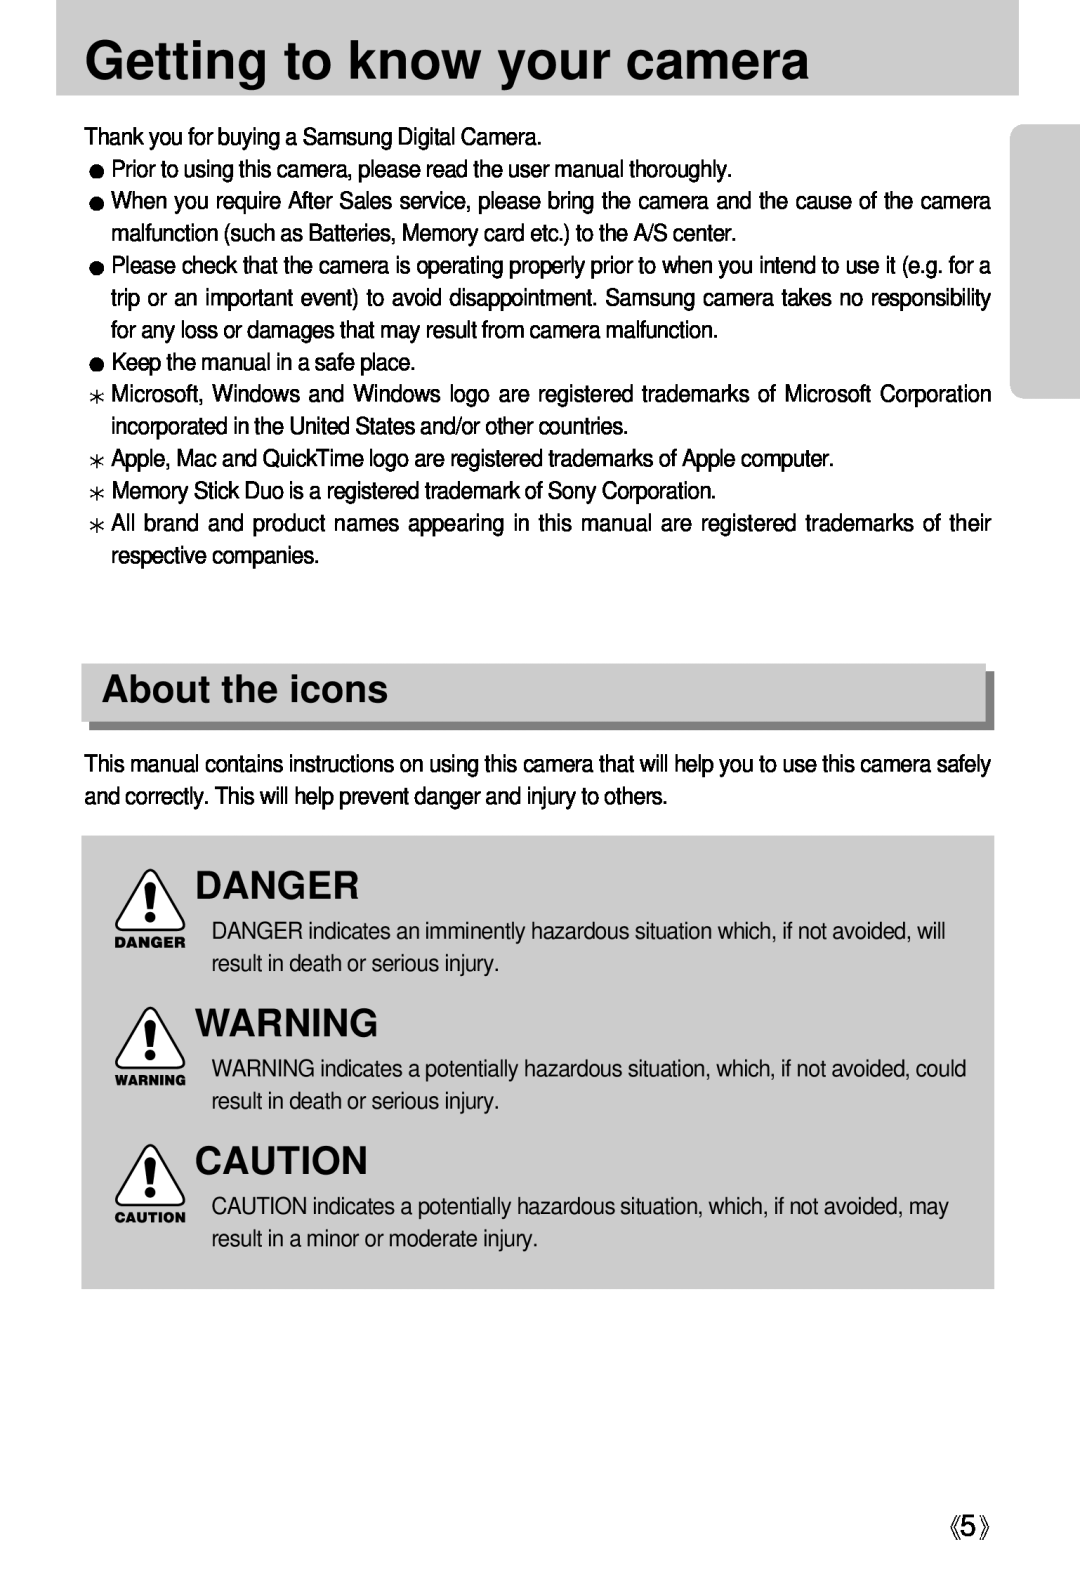 Samsung Digimax U-CA user manual Getting to know your camera, About the icons, Danger 